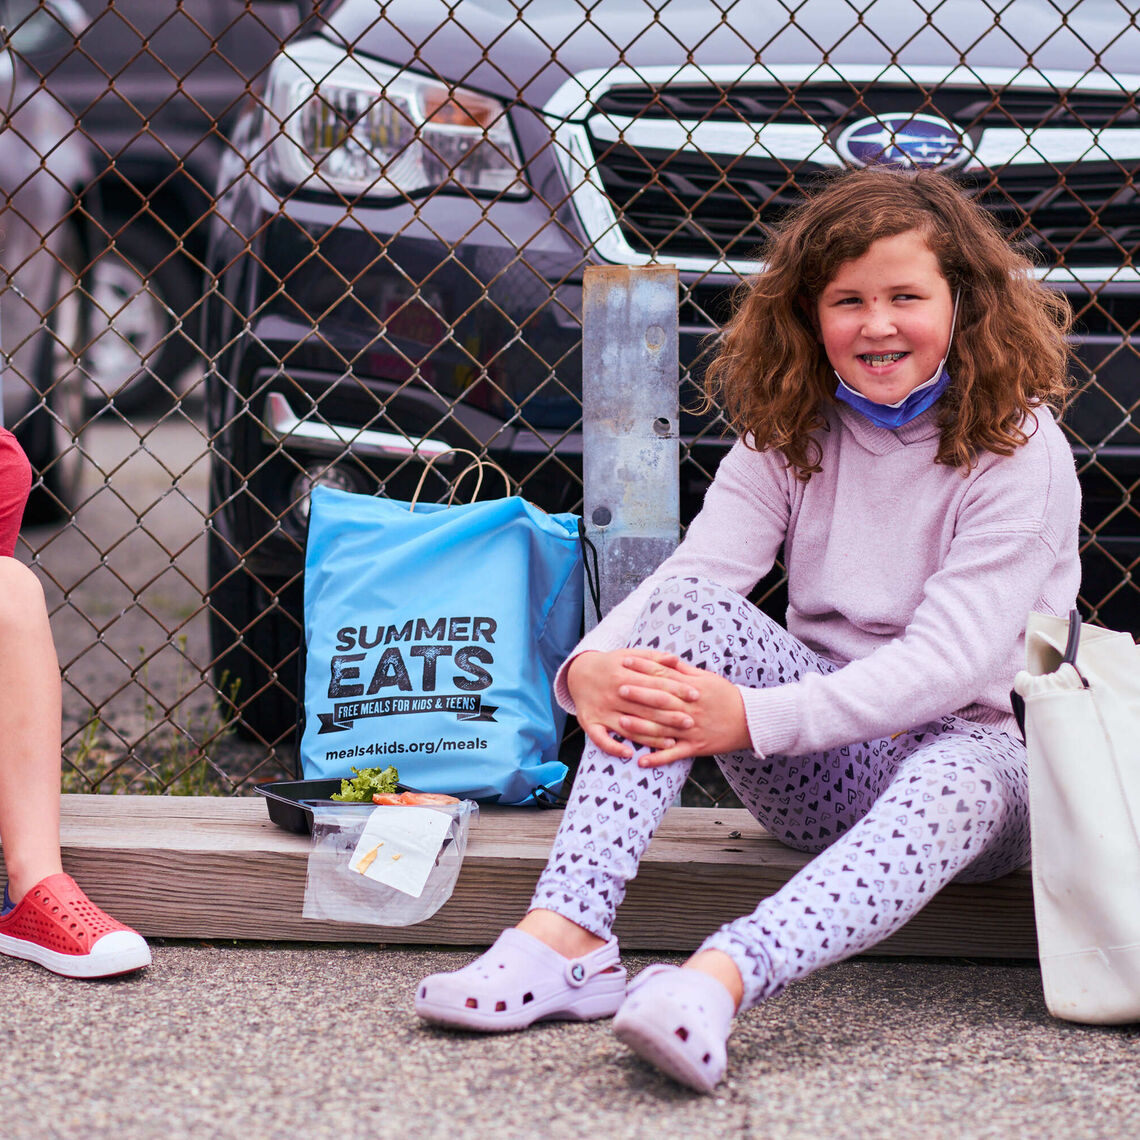 A young boy and girl lean up against a fence at a farmers market enjoy their Summer Eats meal